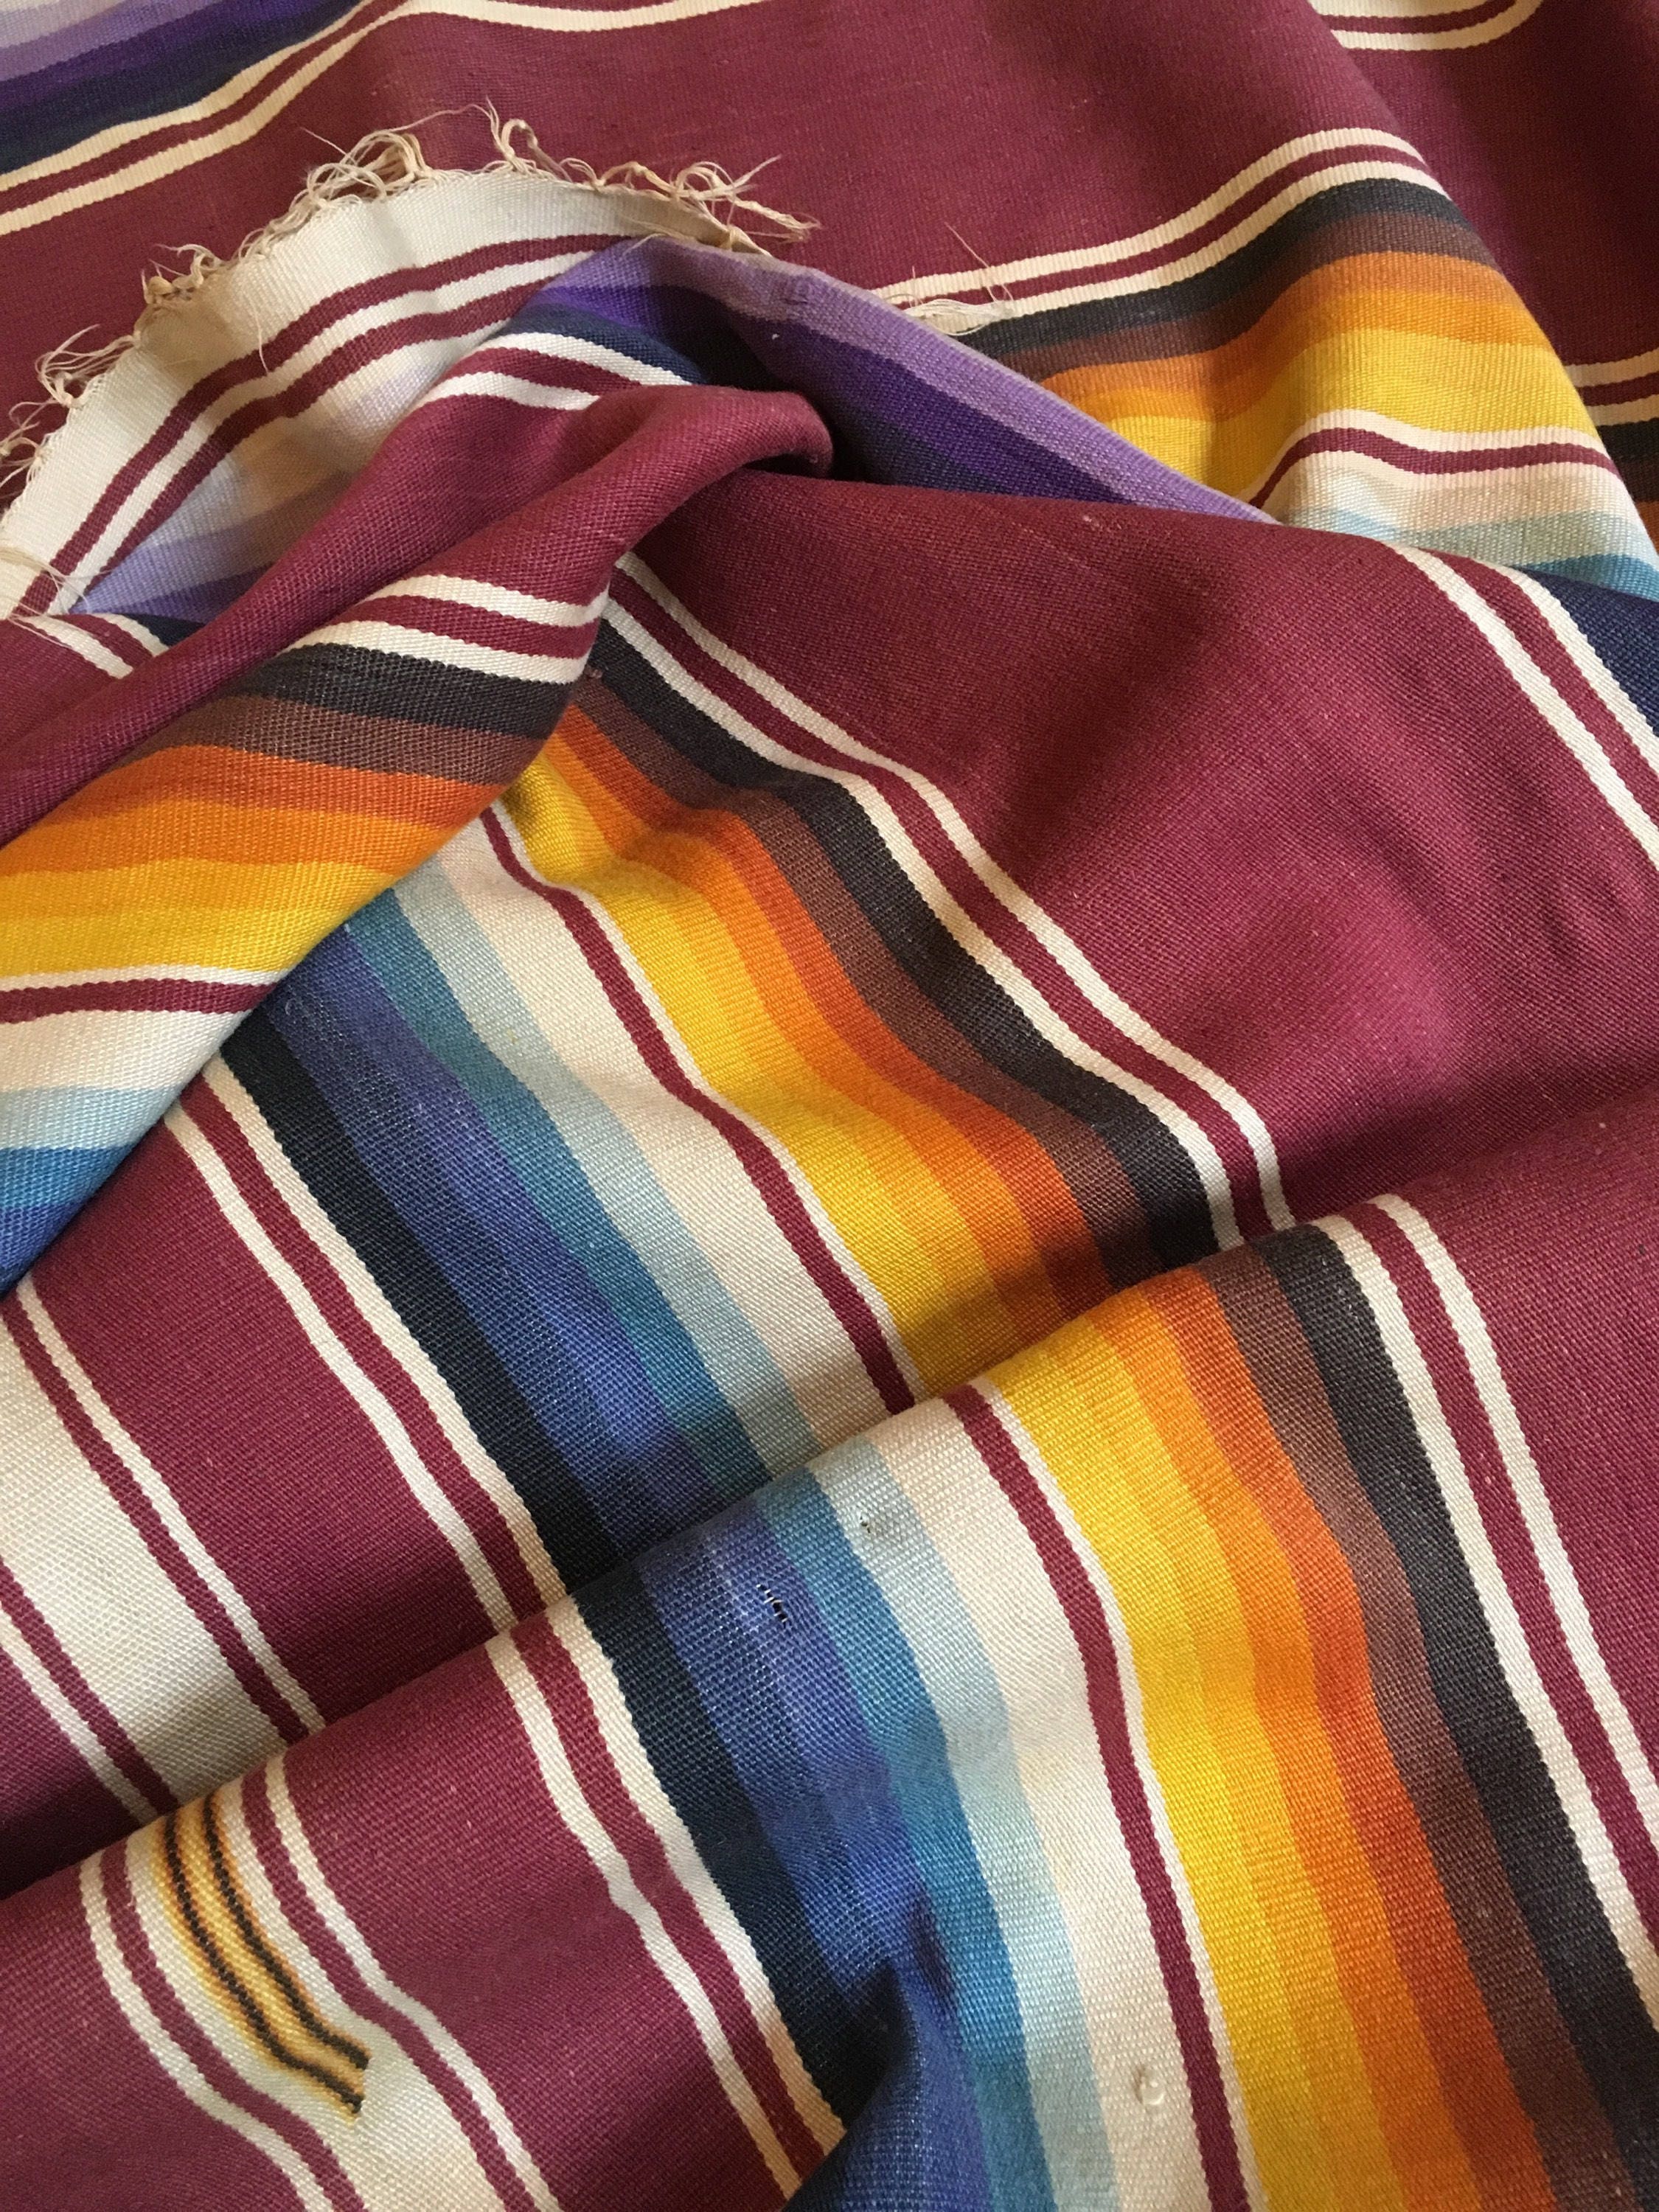 Vintage Serape Saltillo Blanket 40s Throw Woven Mexican Style with ...